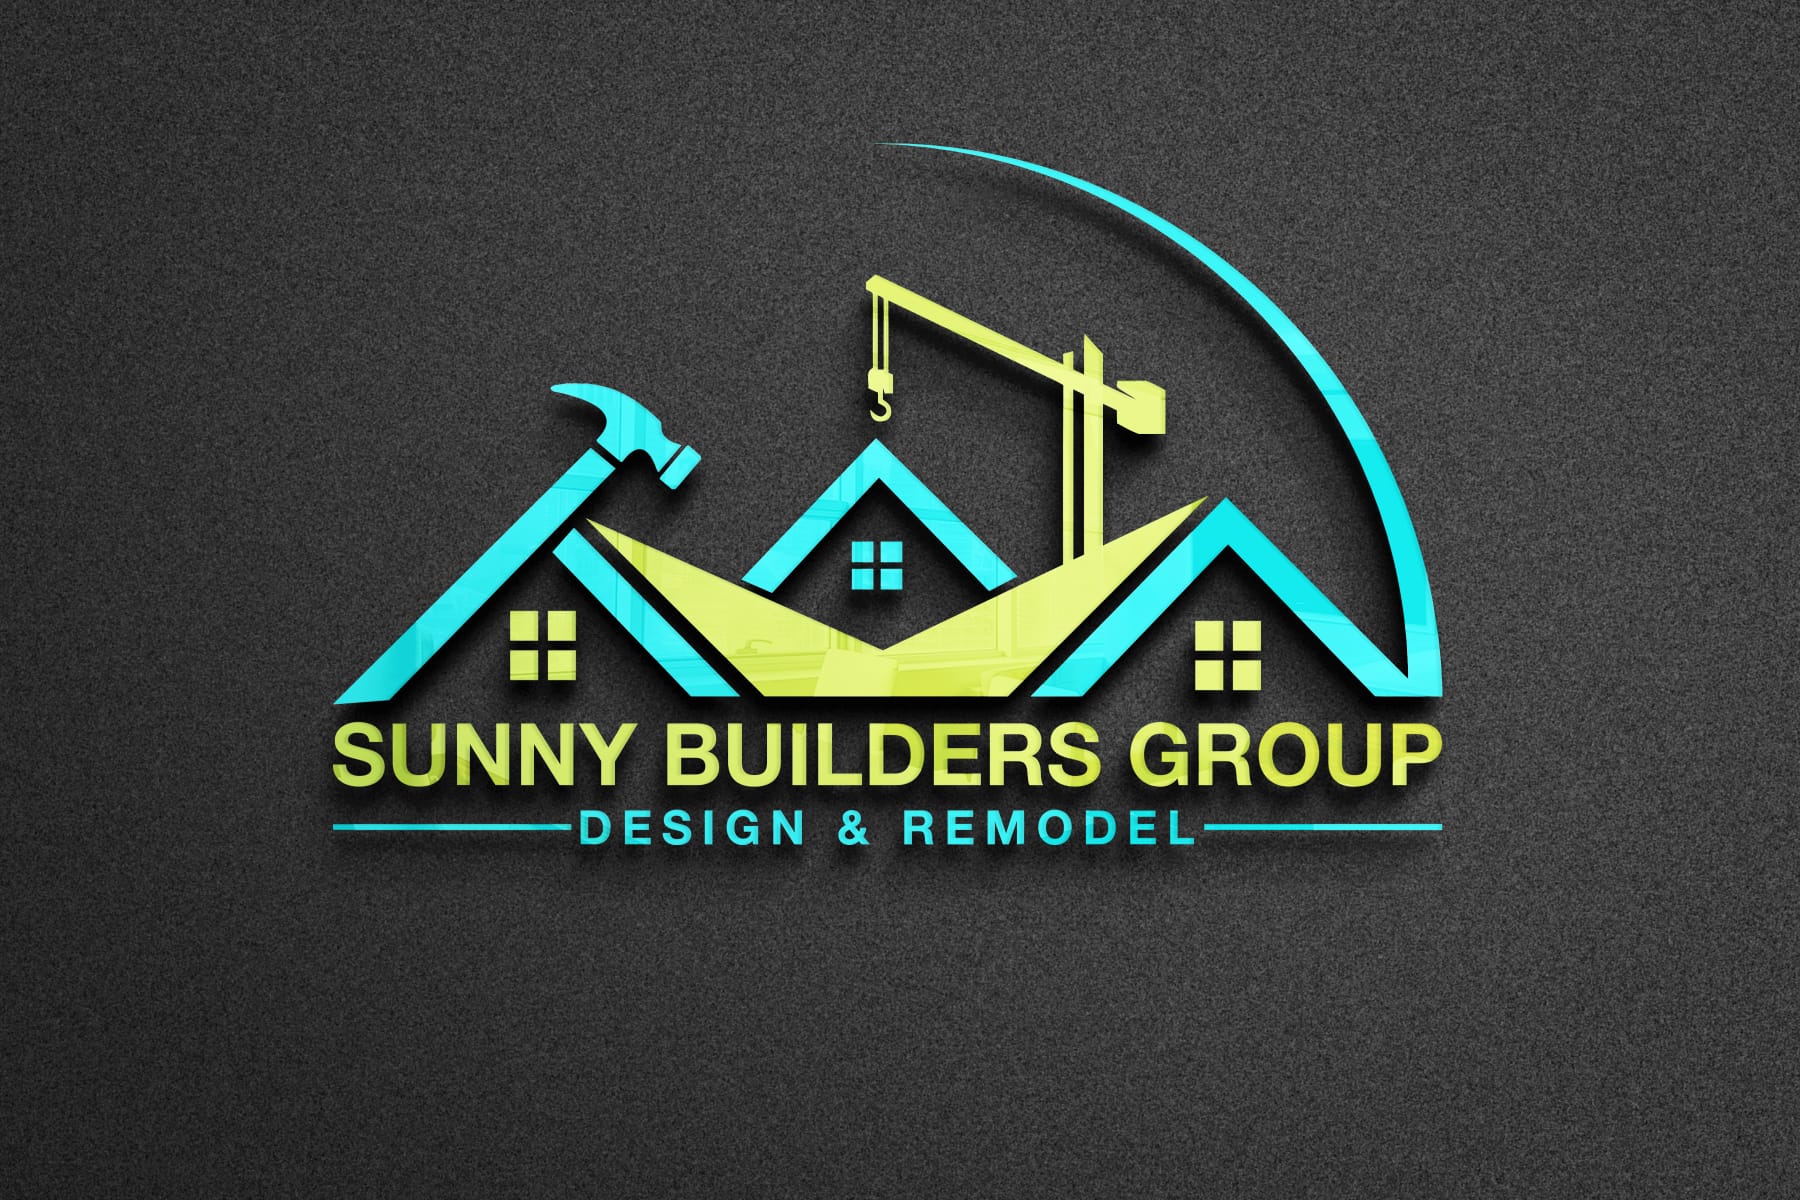 Sunny Builders Group helps homeowners in San Diego remodel their backyards with stunning designs